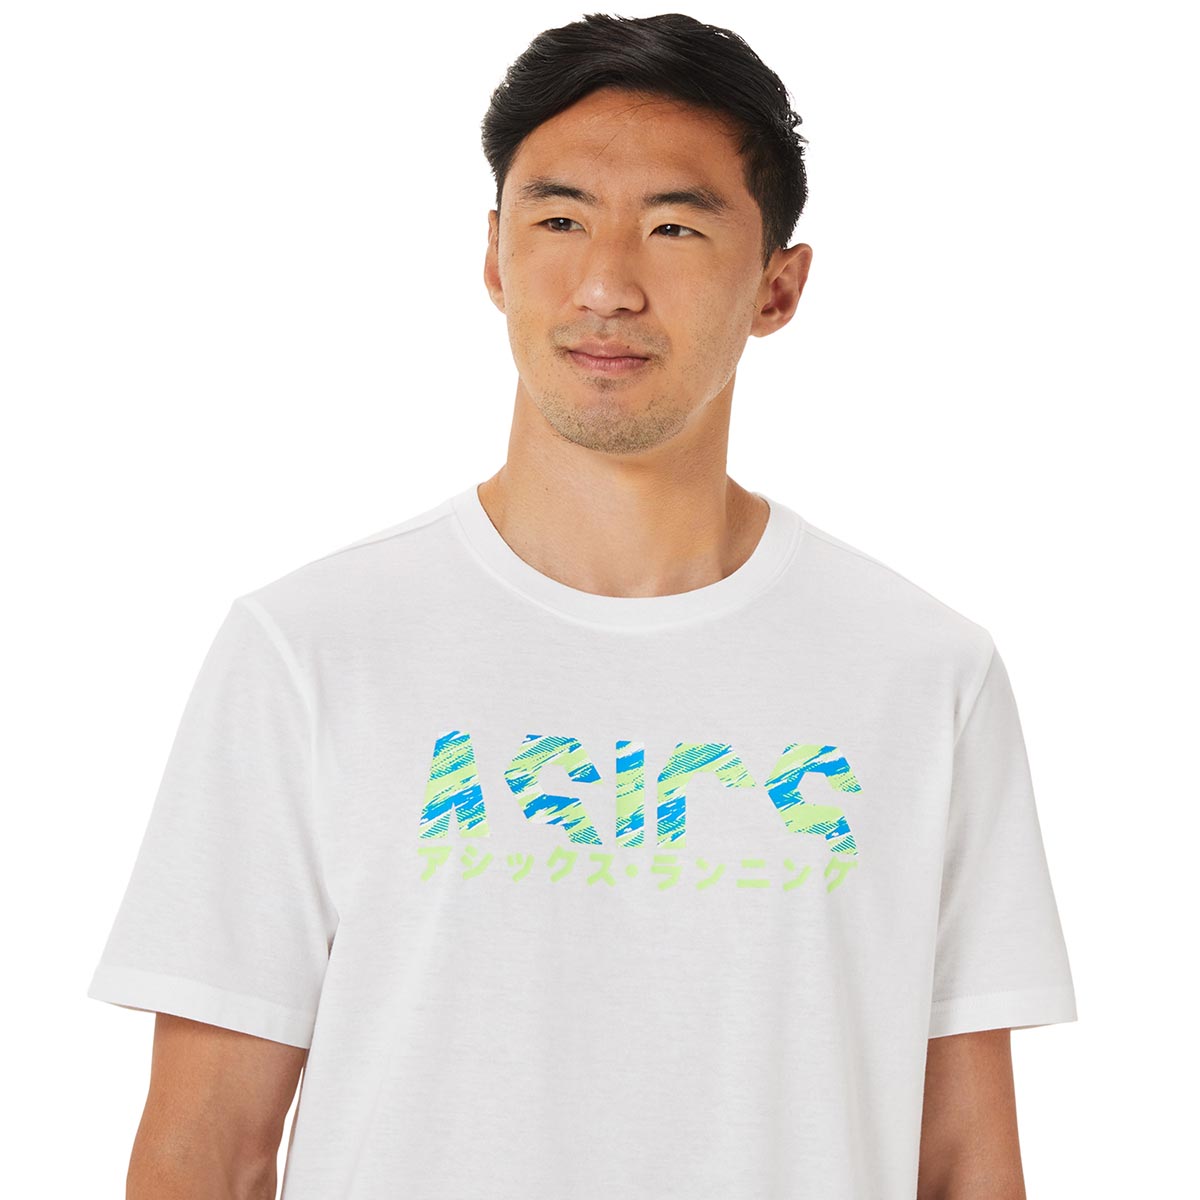 ASICS - COLOR INJECTION T-SHIRT